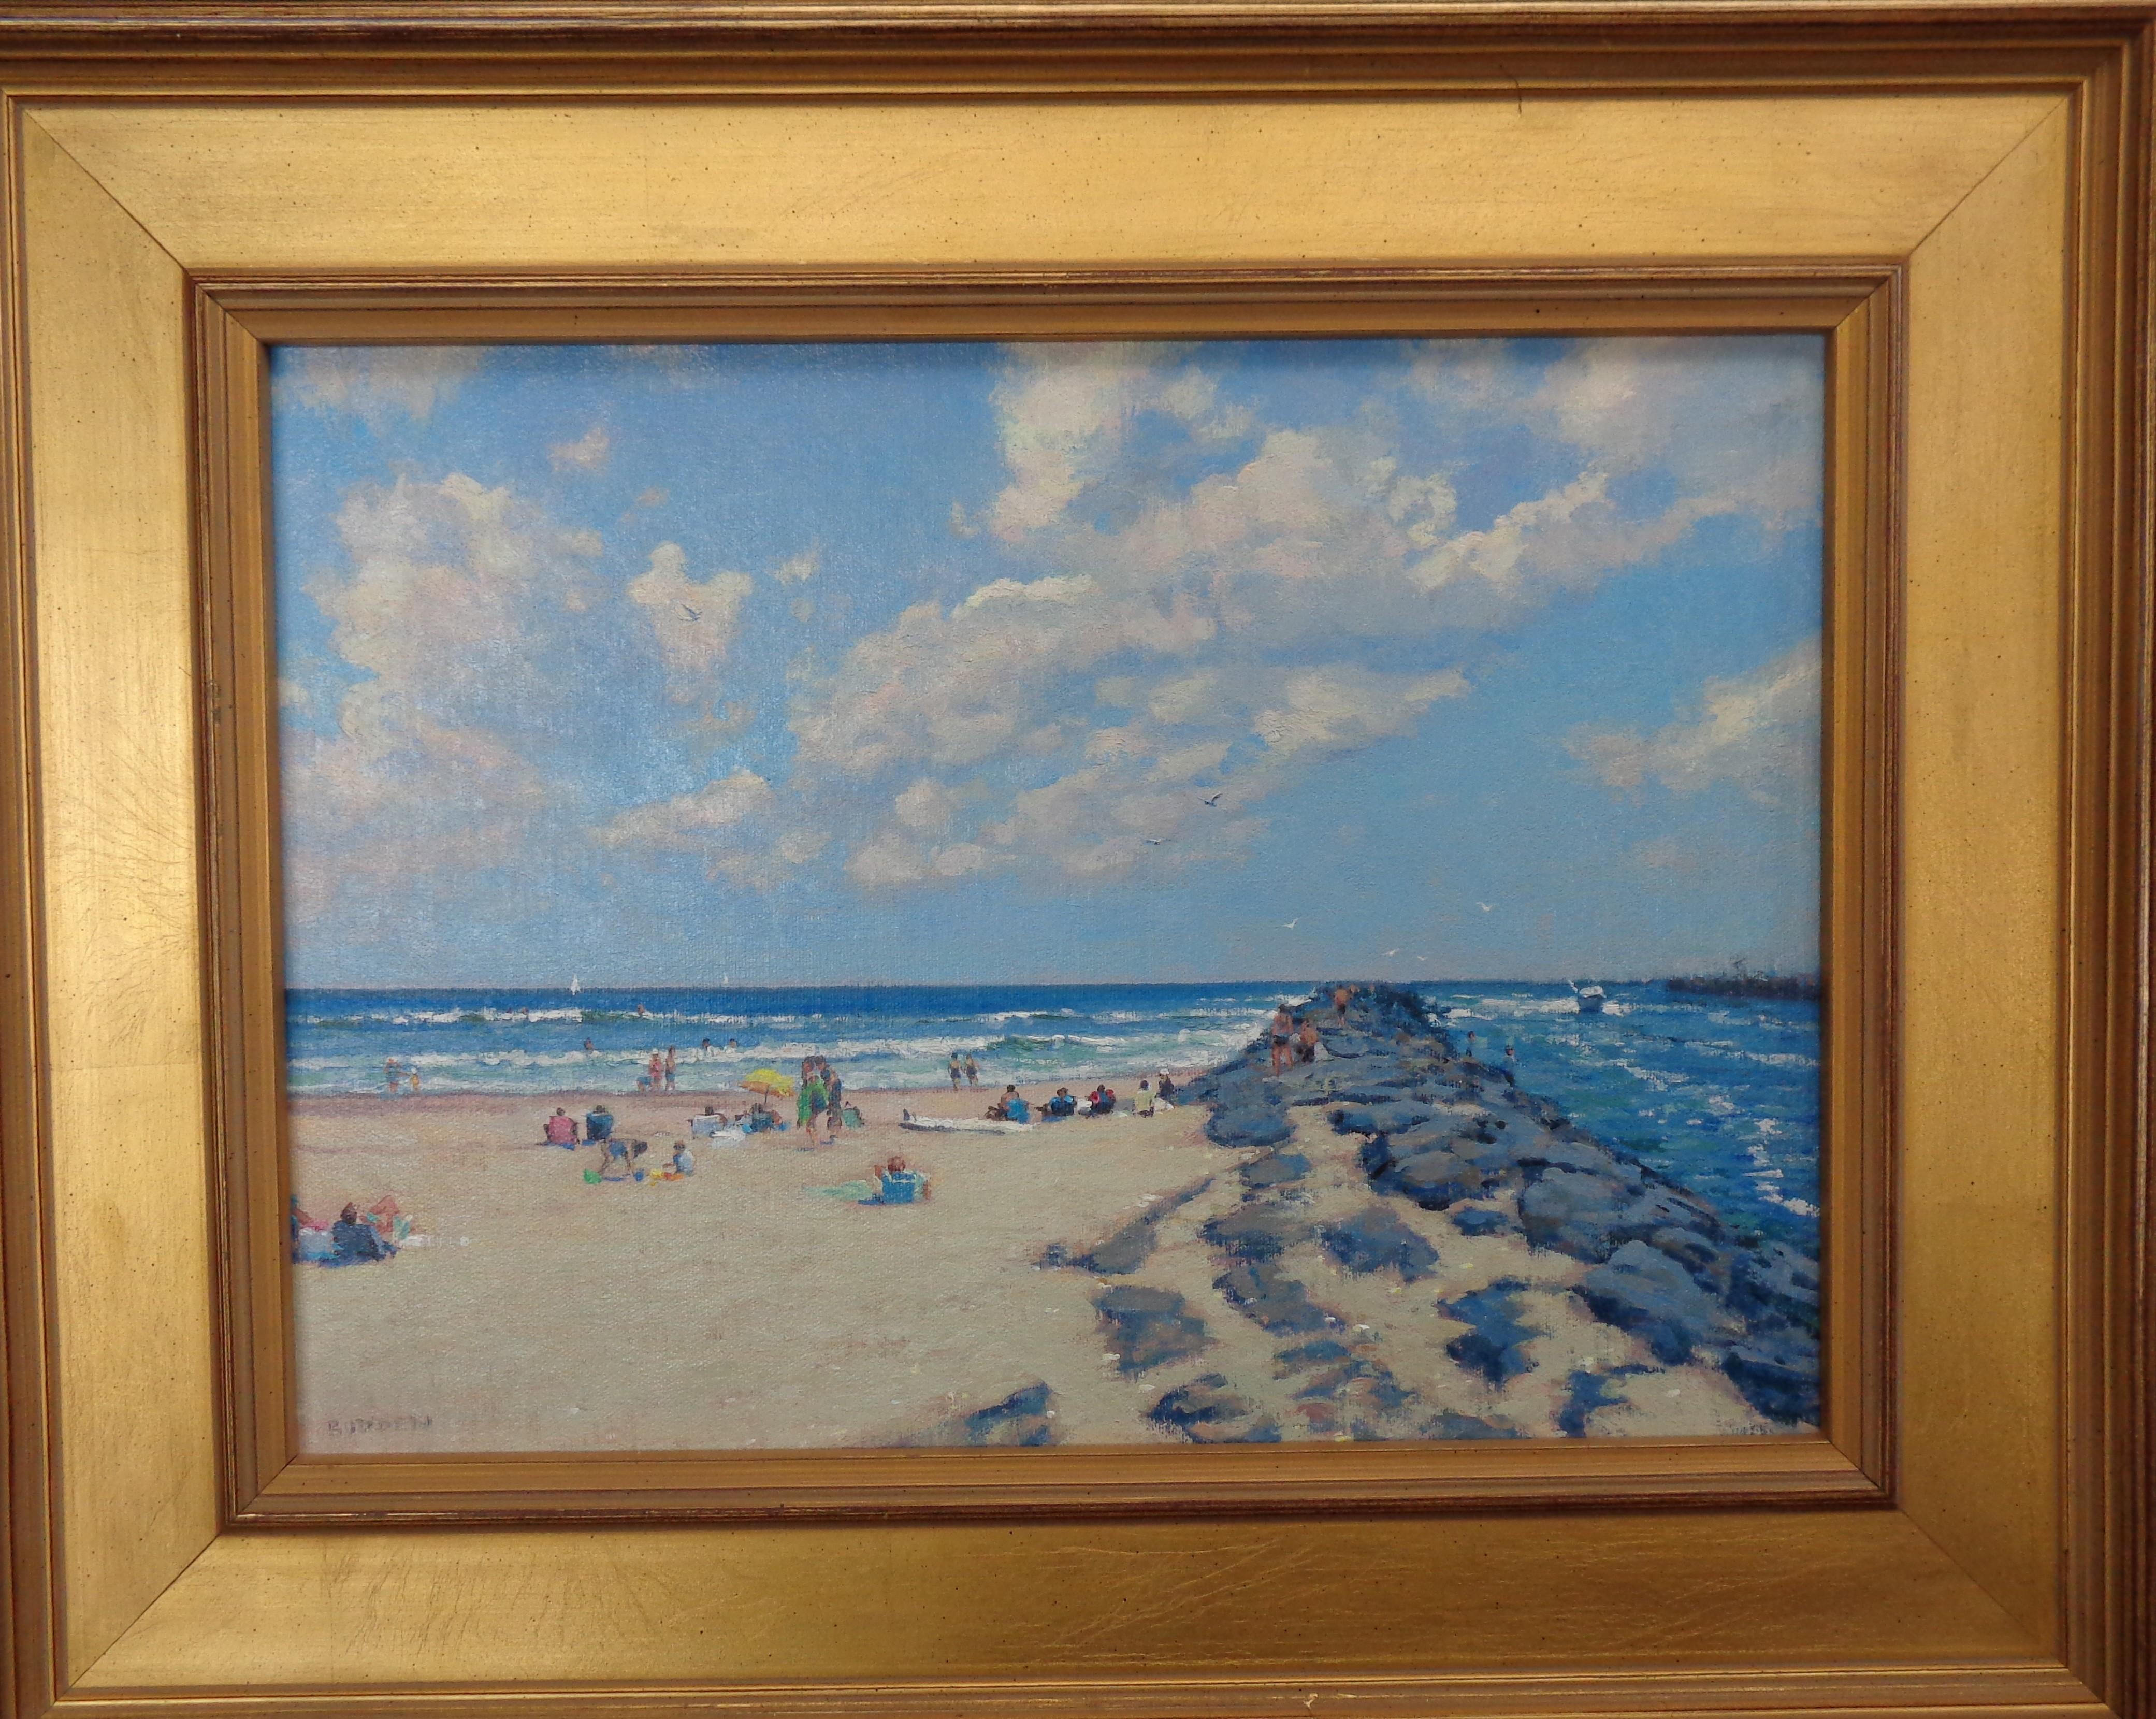 Jersey Shore Manasquan Inlet is an oil painting on canvas by award winning contemporary artist Michael Budden that showcases a beautiful beach day at the Jersey Shore. This painting is in good condition but the frame shows some wear as it is older.